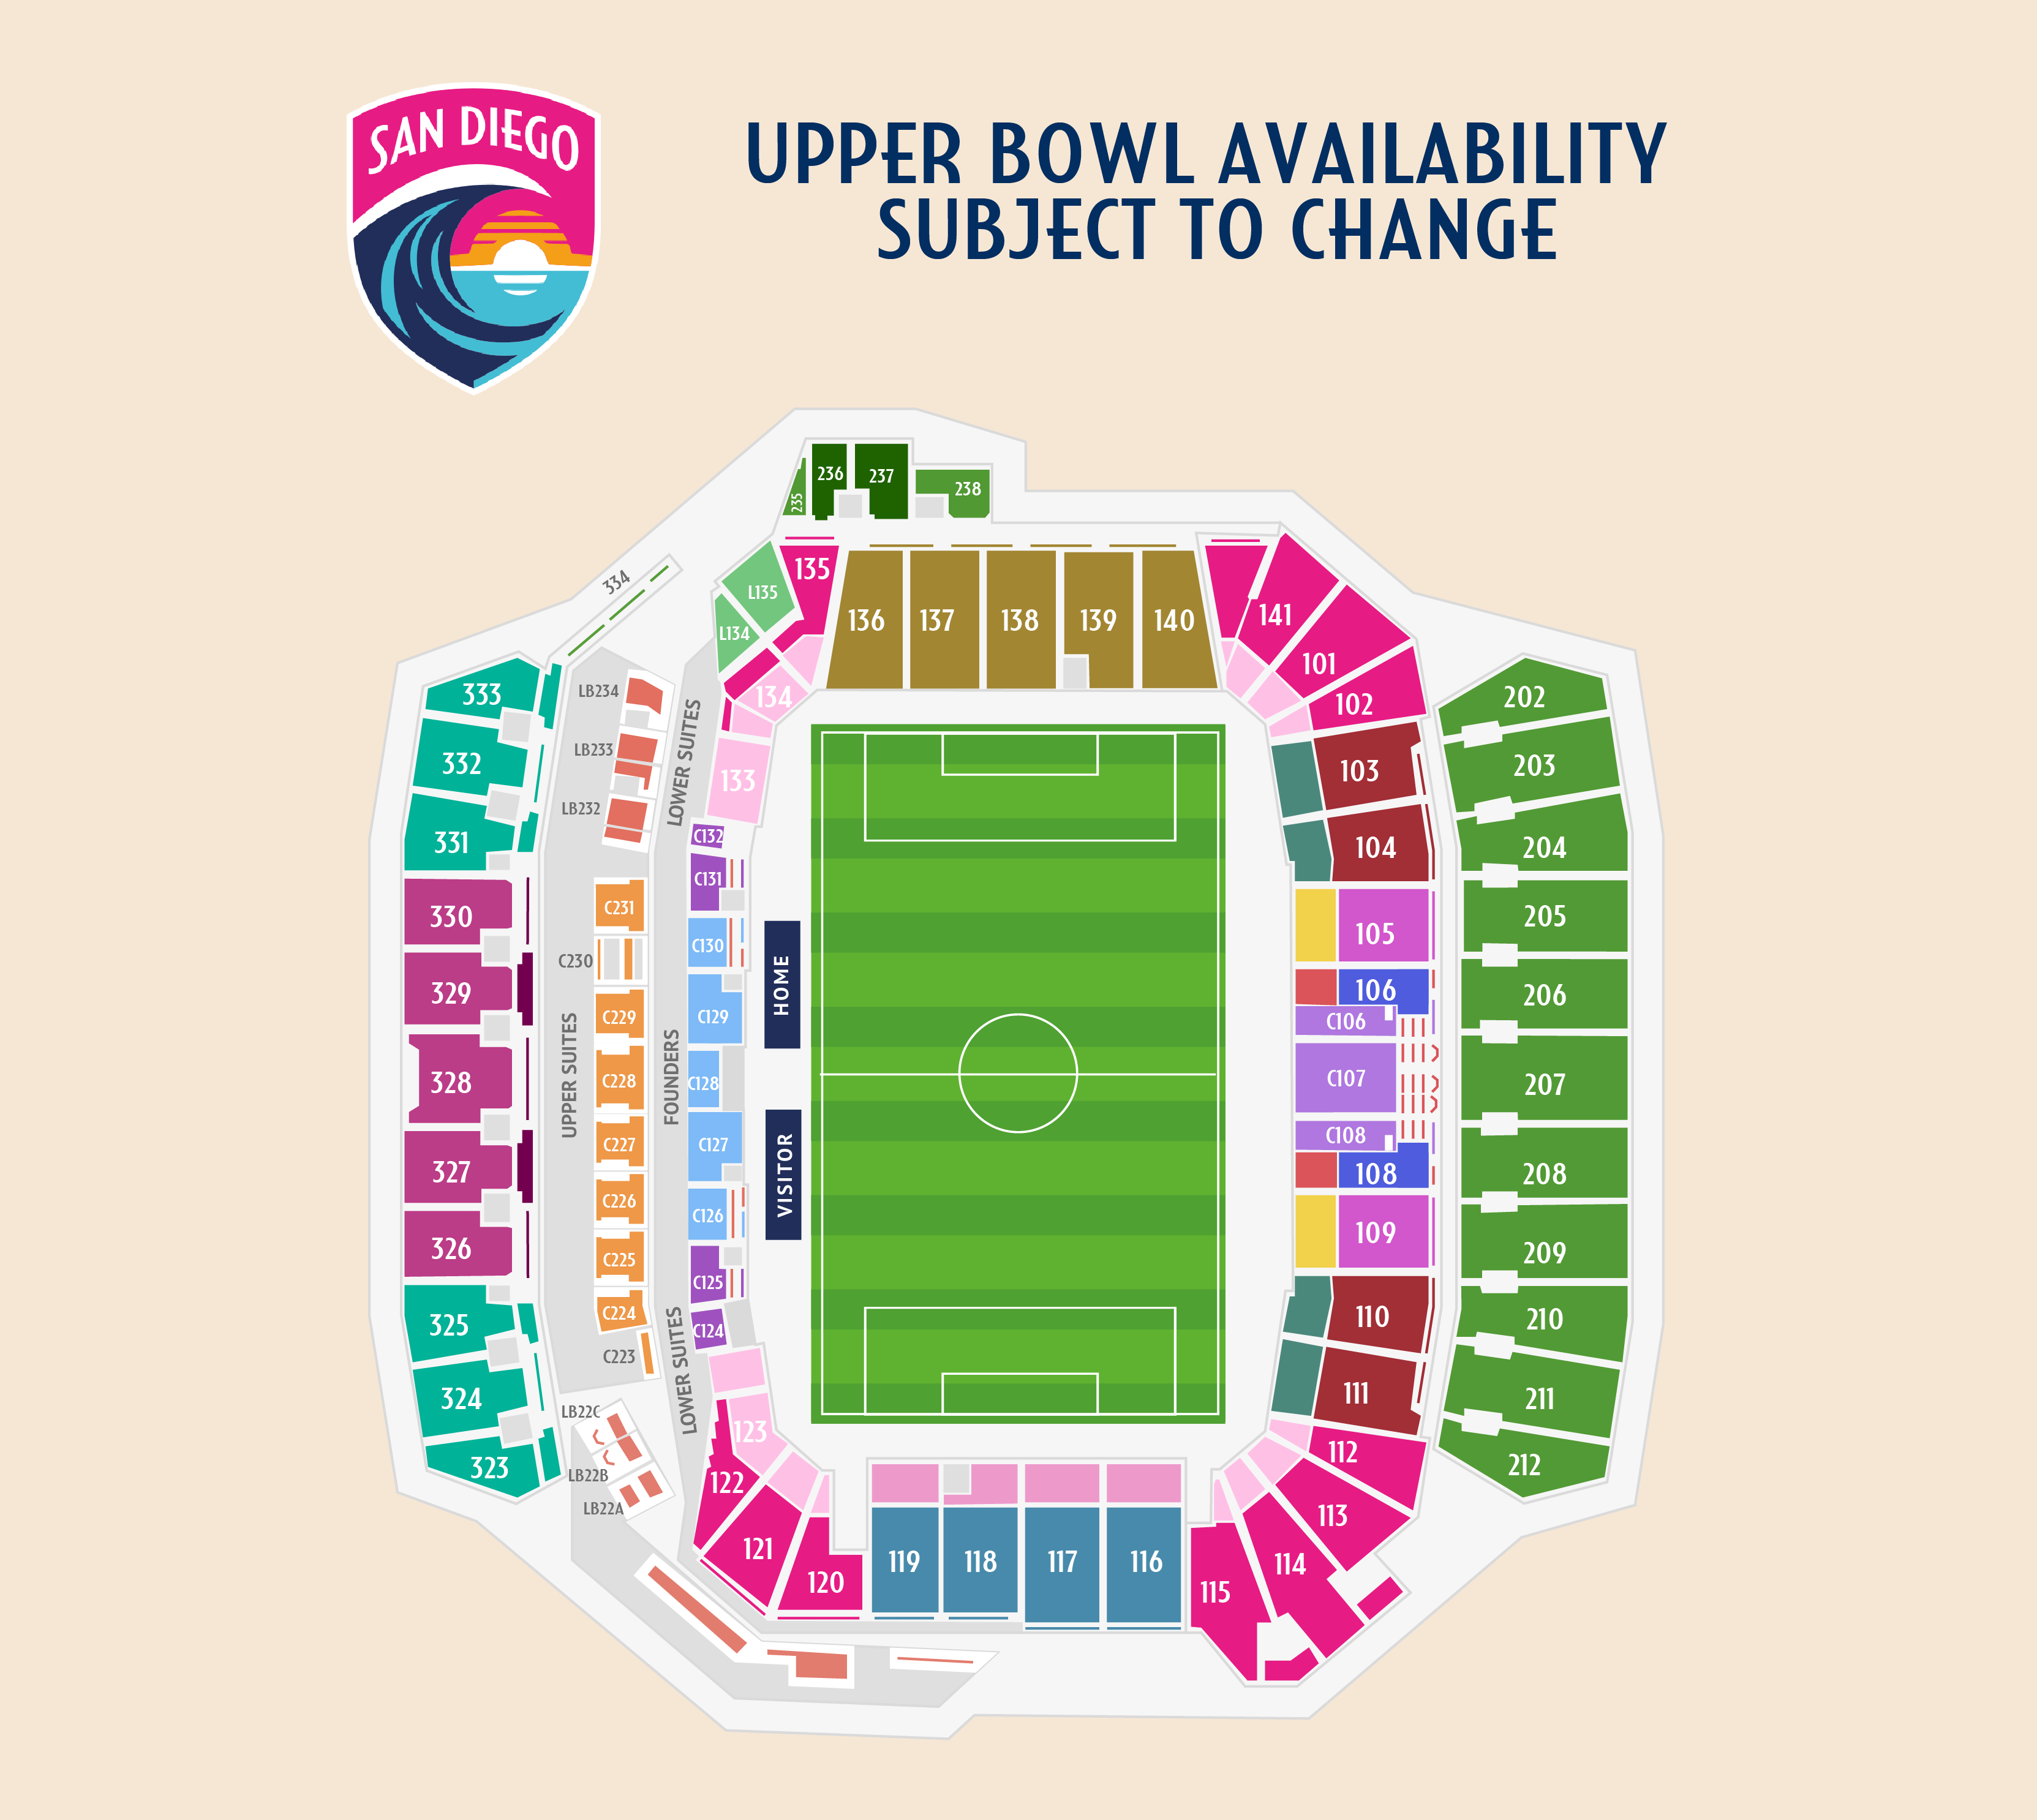 Upper Bowl Availability Subject to Change